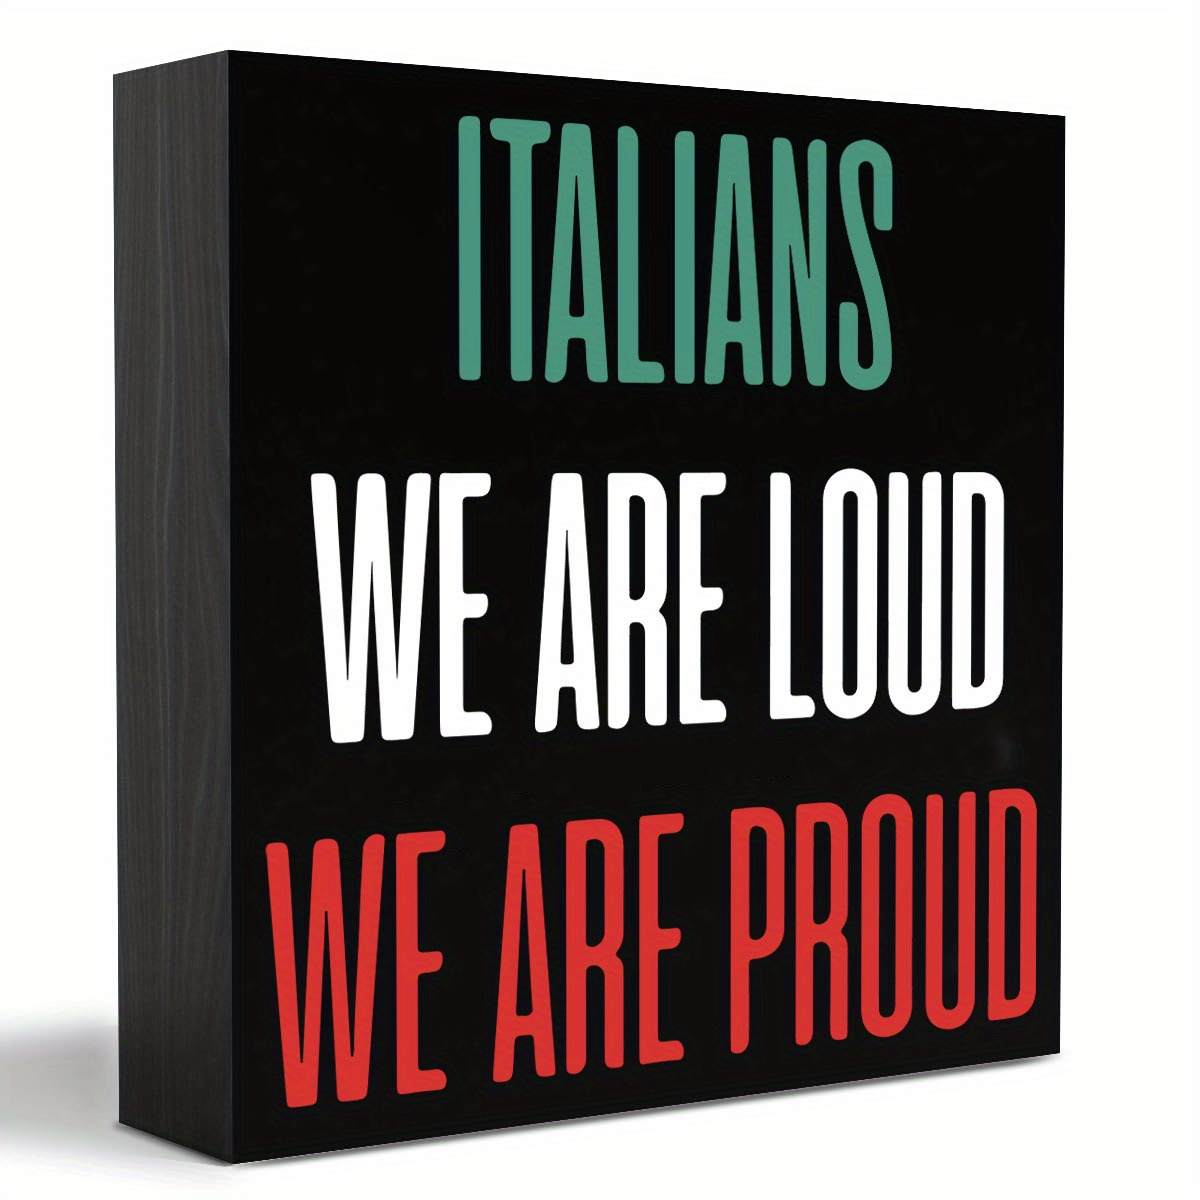 

1pc, Italians We Are Loud We Are Proud Sign, Decorative Wooden Box Sign, Thank You Appreciation Gift For Teacher Boss Leader Coworker Wood Block Plaque Desk Decor Office Shelf Or Wall Display